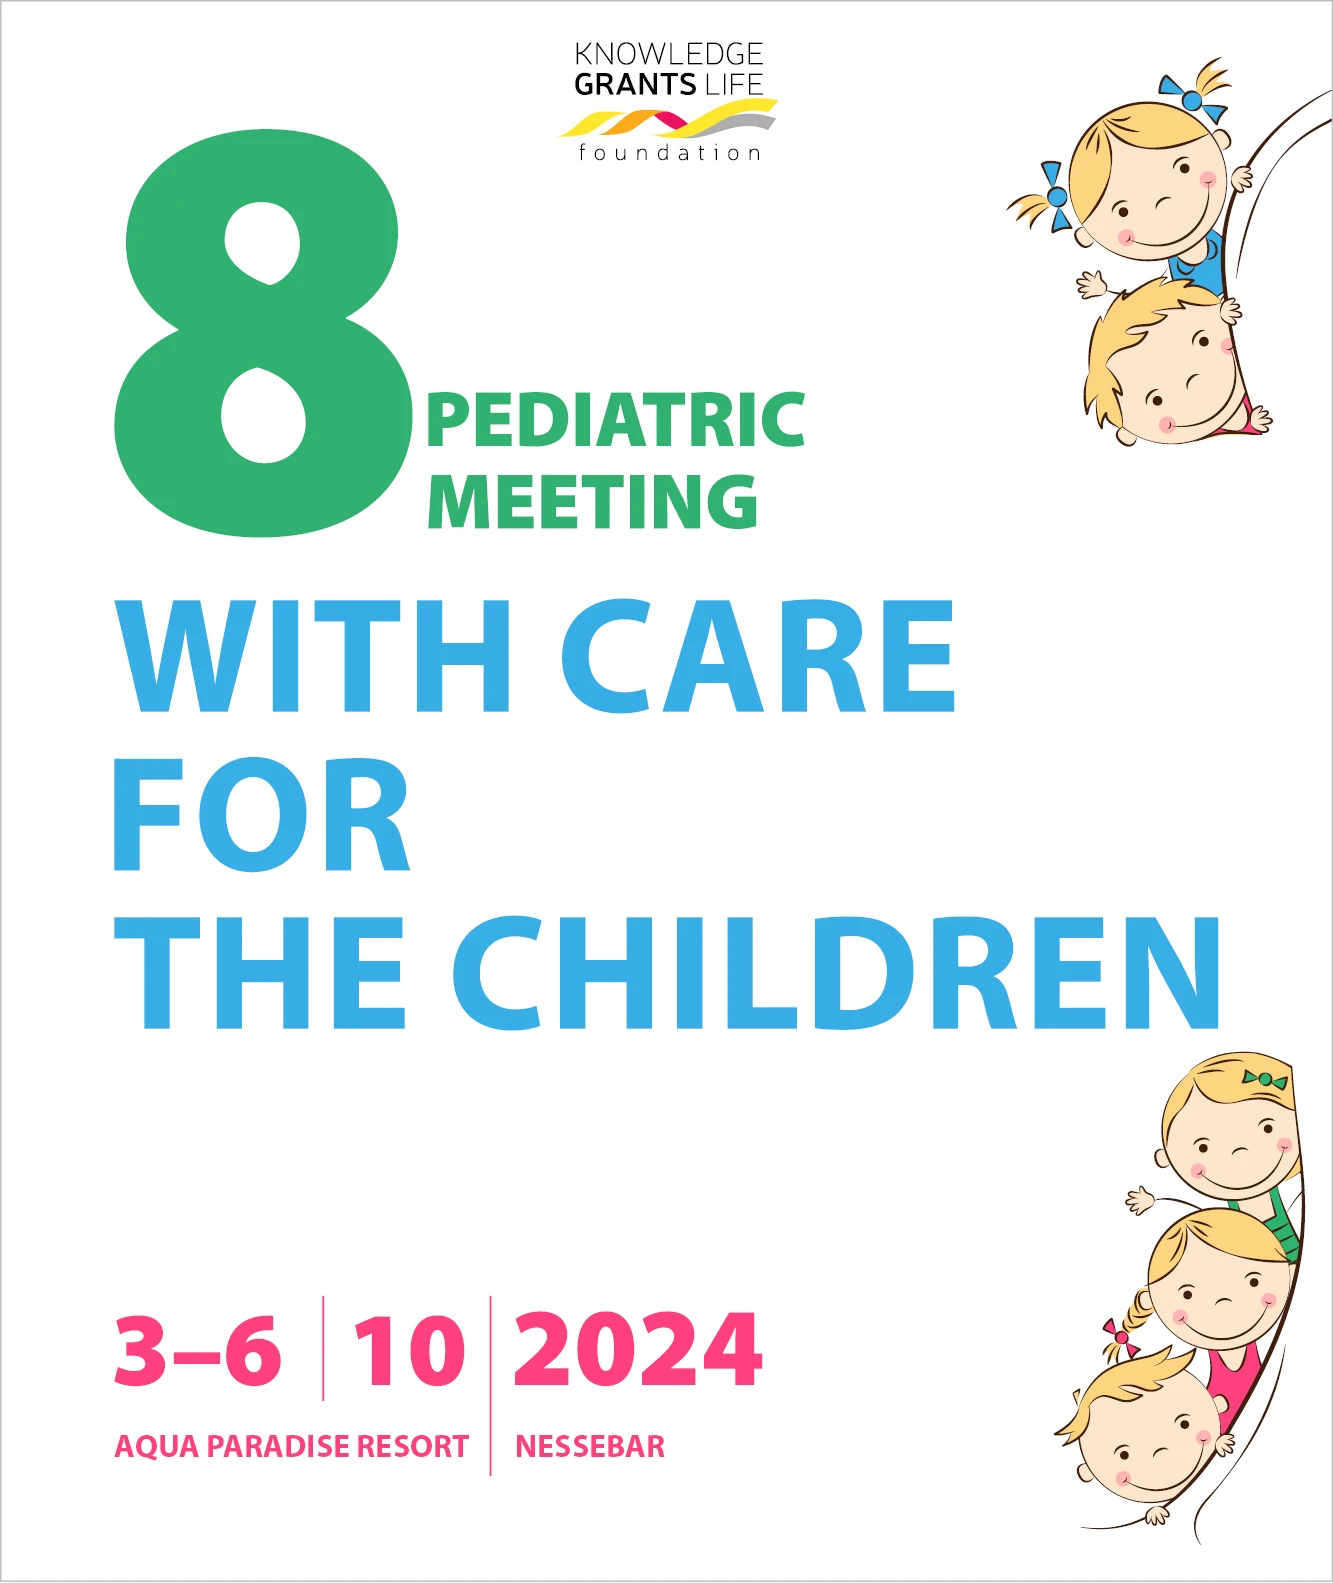 Eight Pediatric Meeting “With Care for the Children”